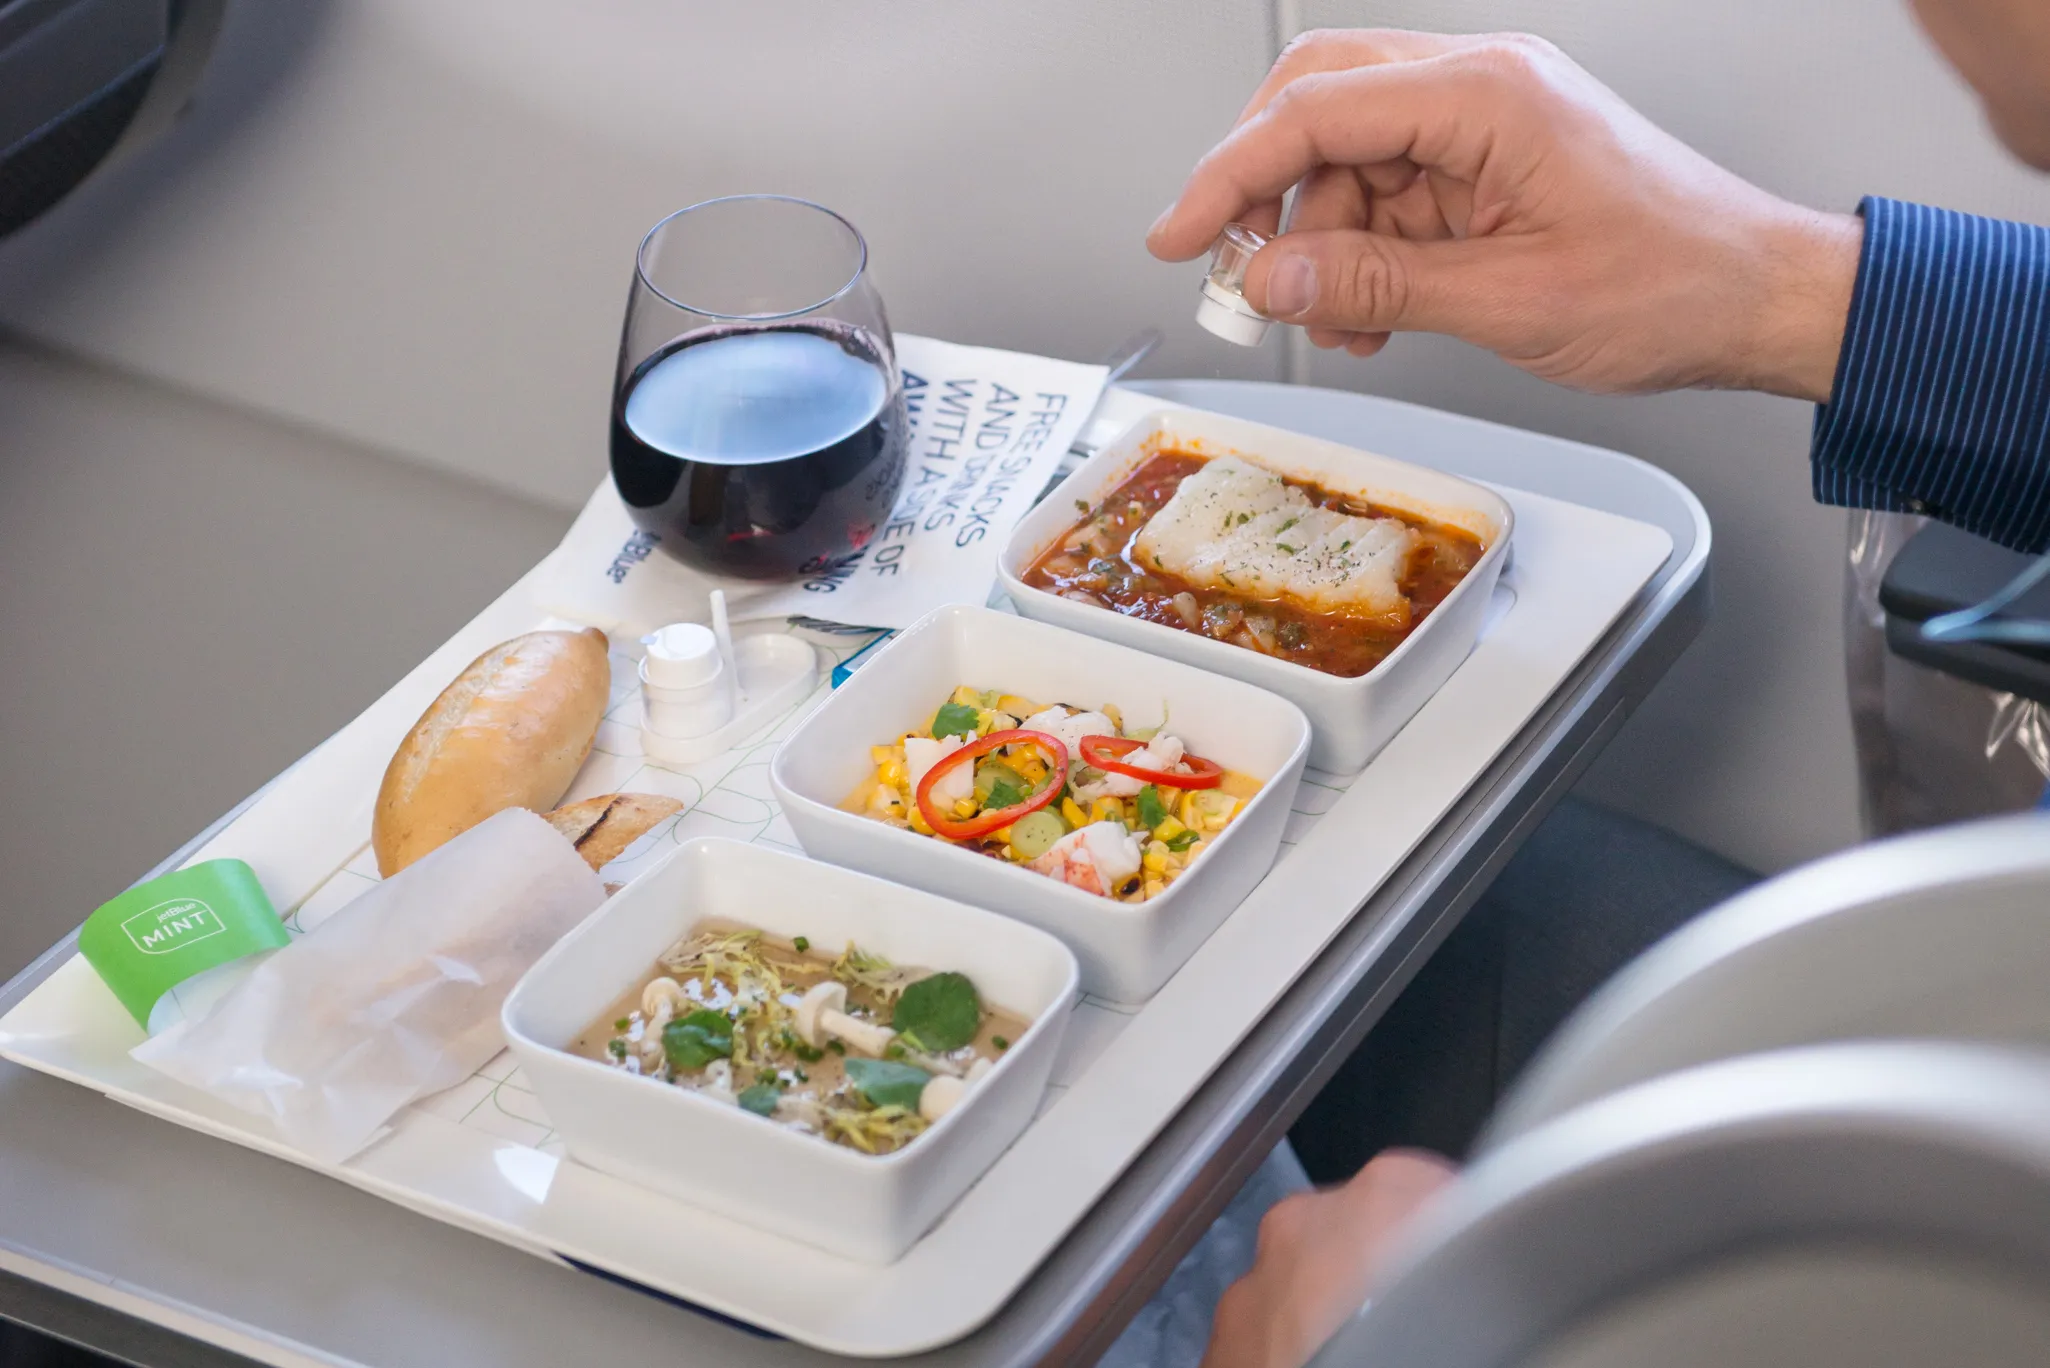 Sky-High Snacks Get a Cool Makeover: More Airlines Offer Tasty Frozen Meals to Surprised Travelers